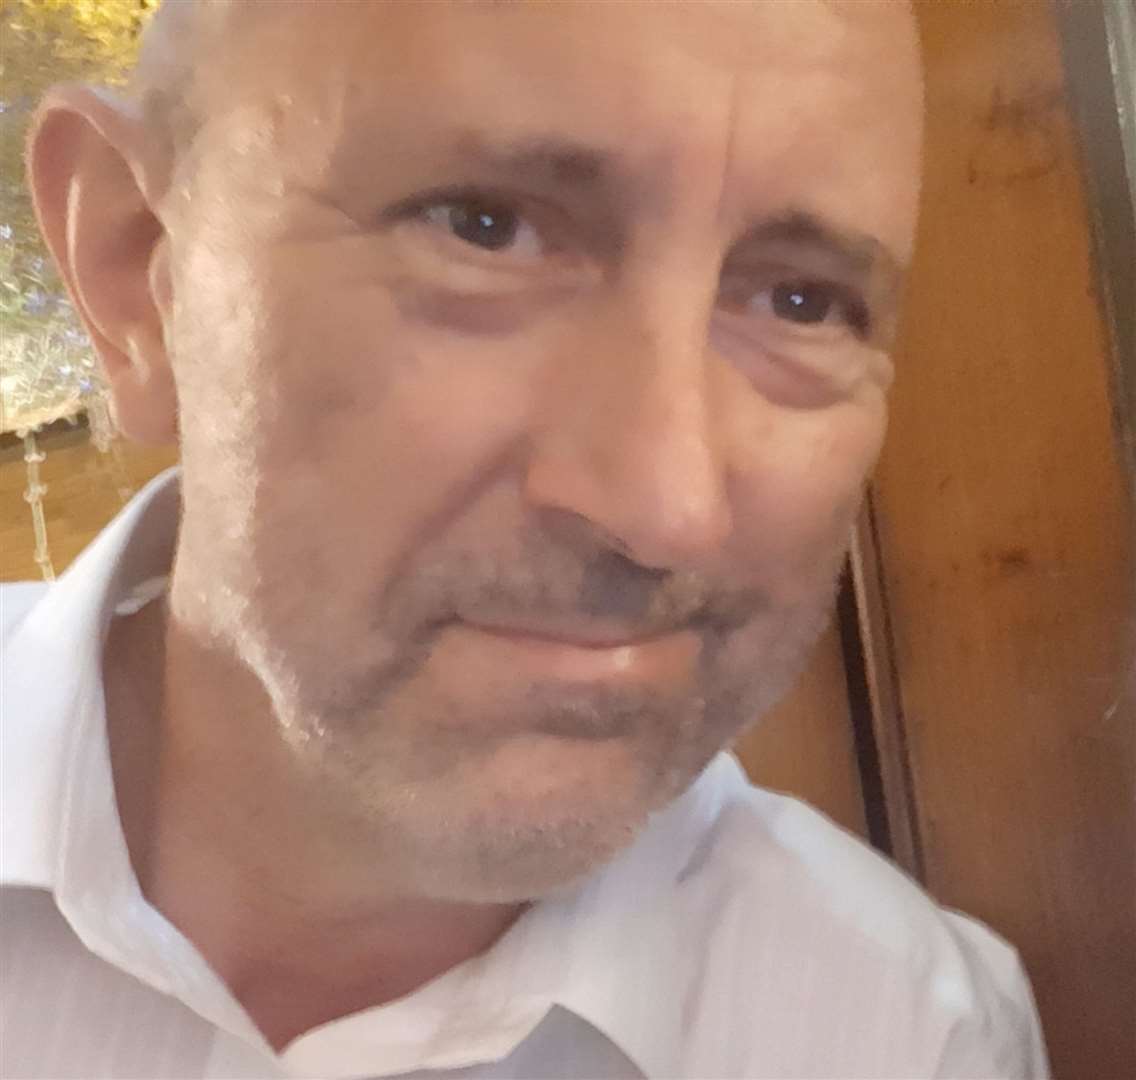 Paul Perkins has been missing from Tonbridge Wells since this afternoon